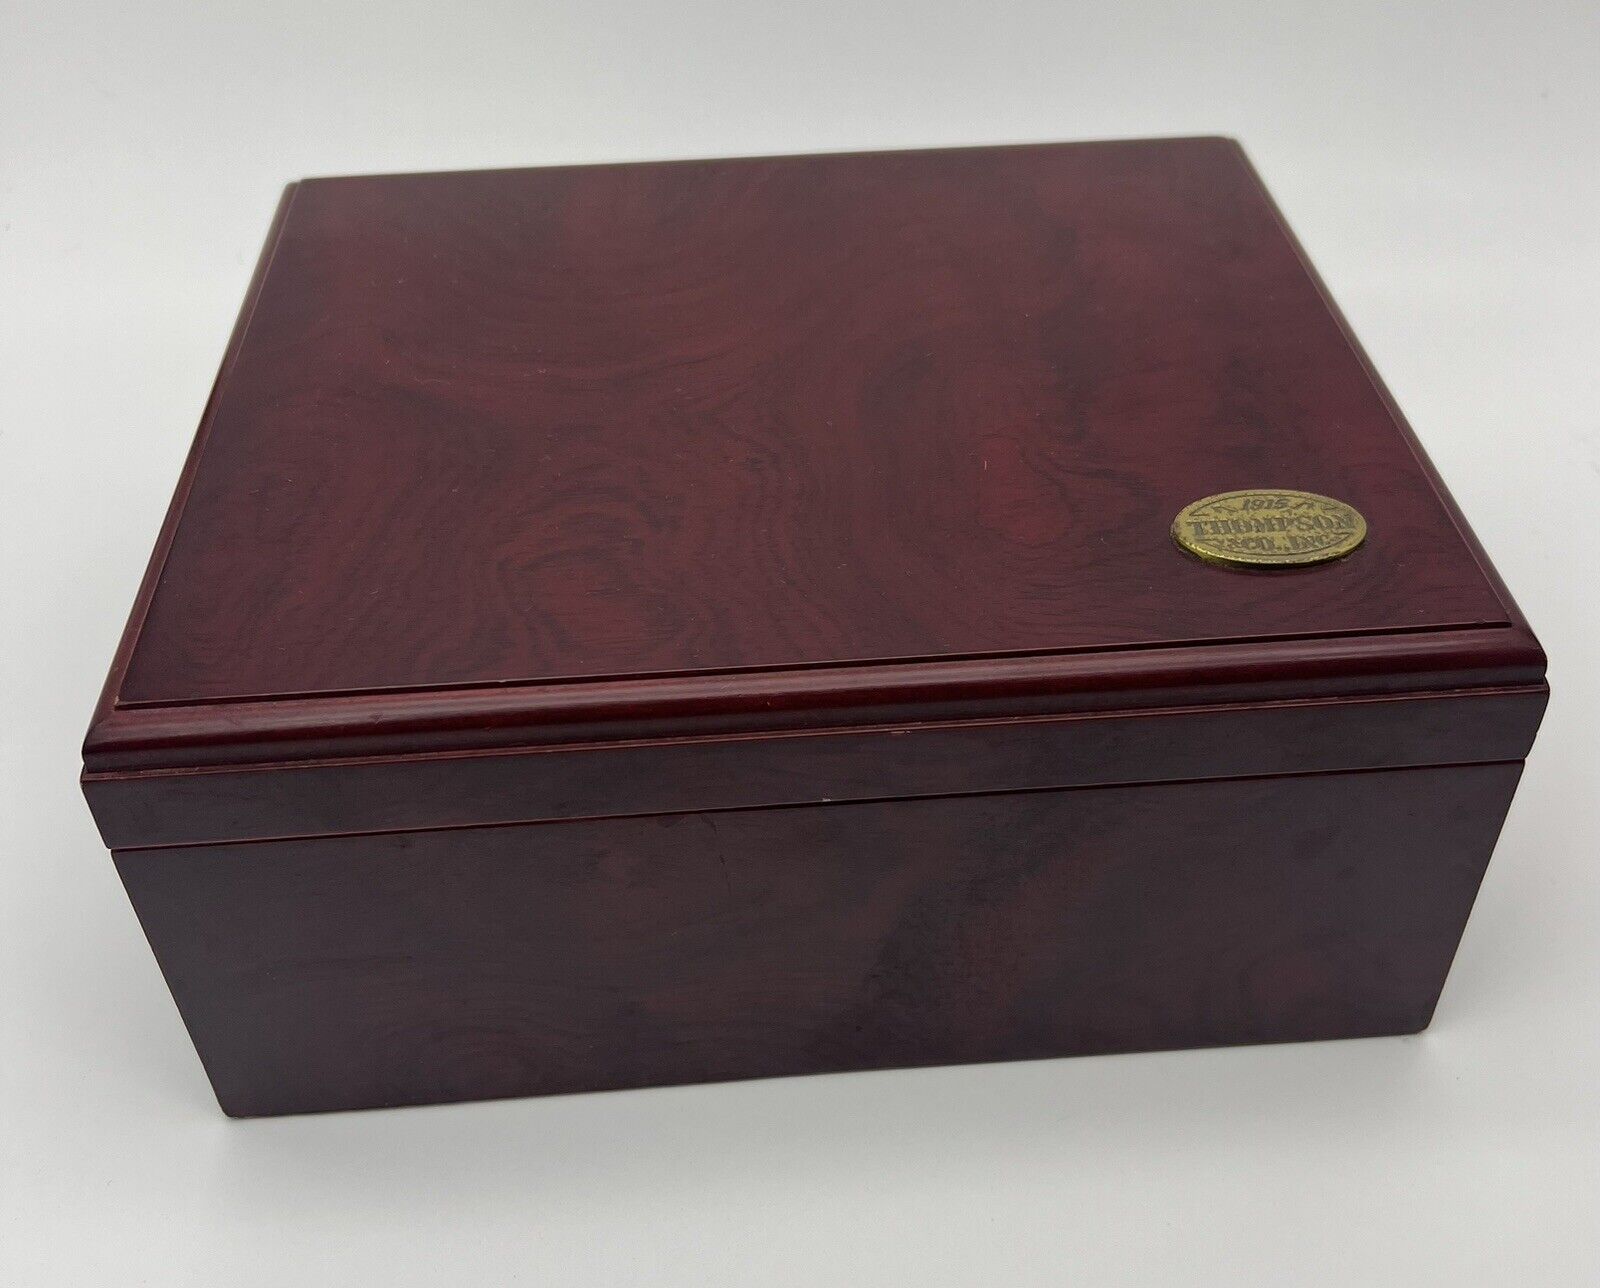 Thompson & Co., Inc. 1915 Cherry Wood Finish Cigar box and Humidor Excellent